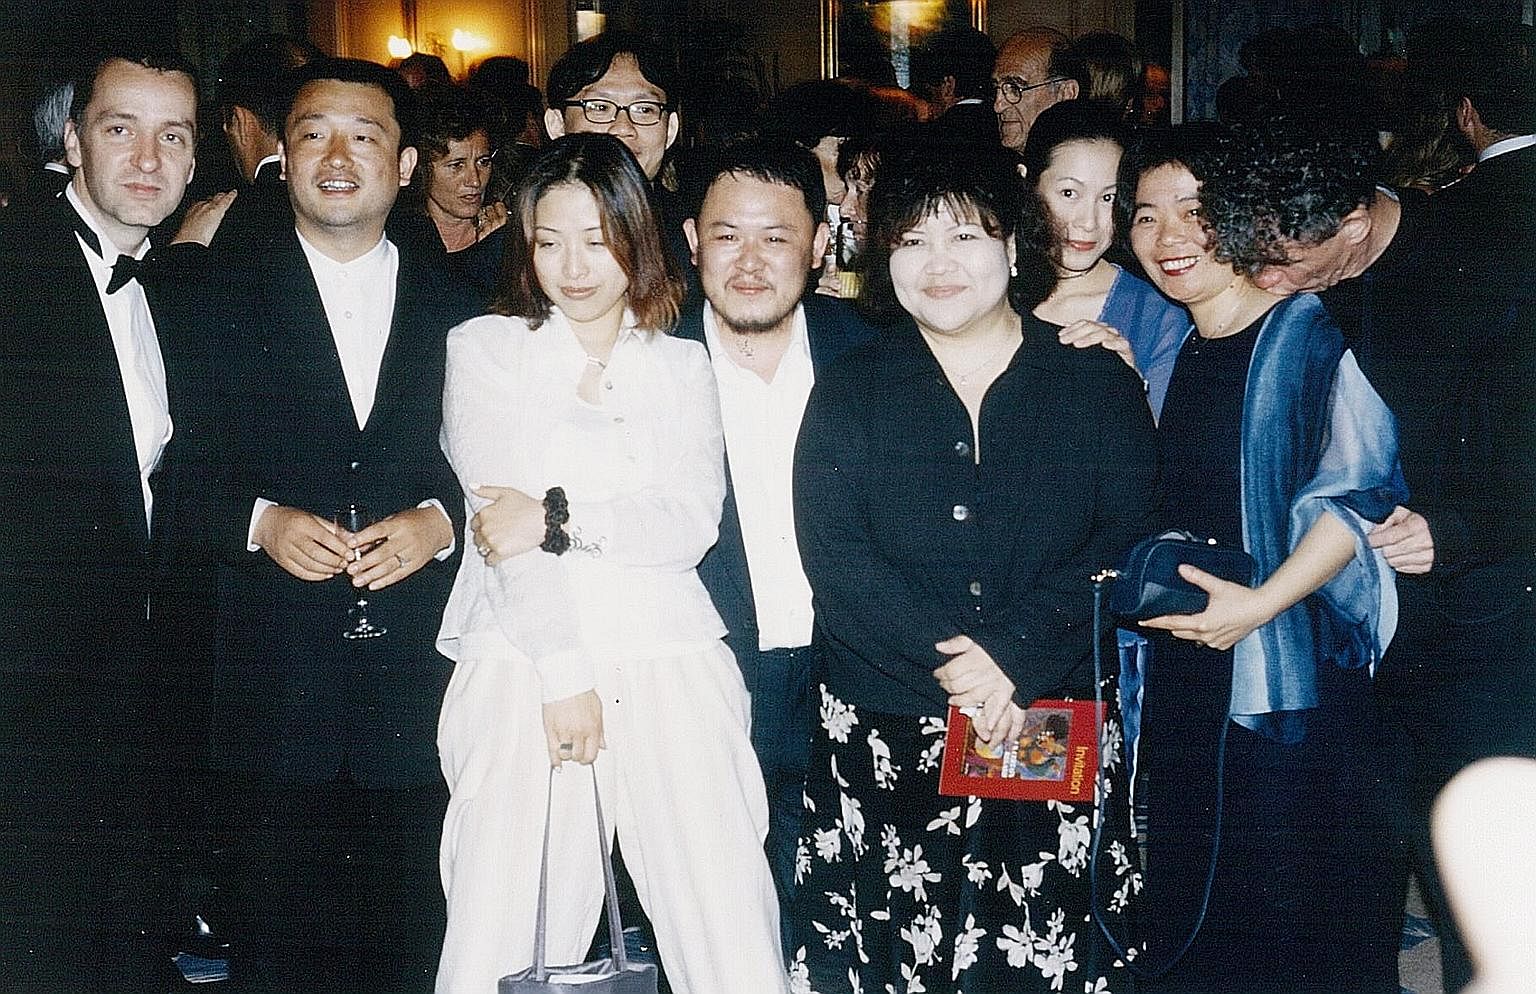 Mr Jeune (third from left) with Cannes' former artistic director Gilles Jacob (fourth from left) in the 1990s.